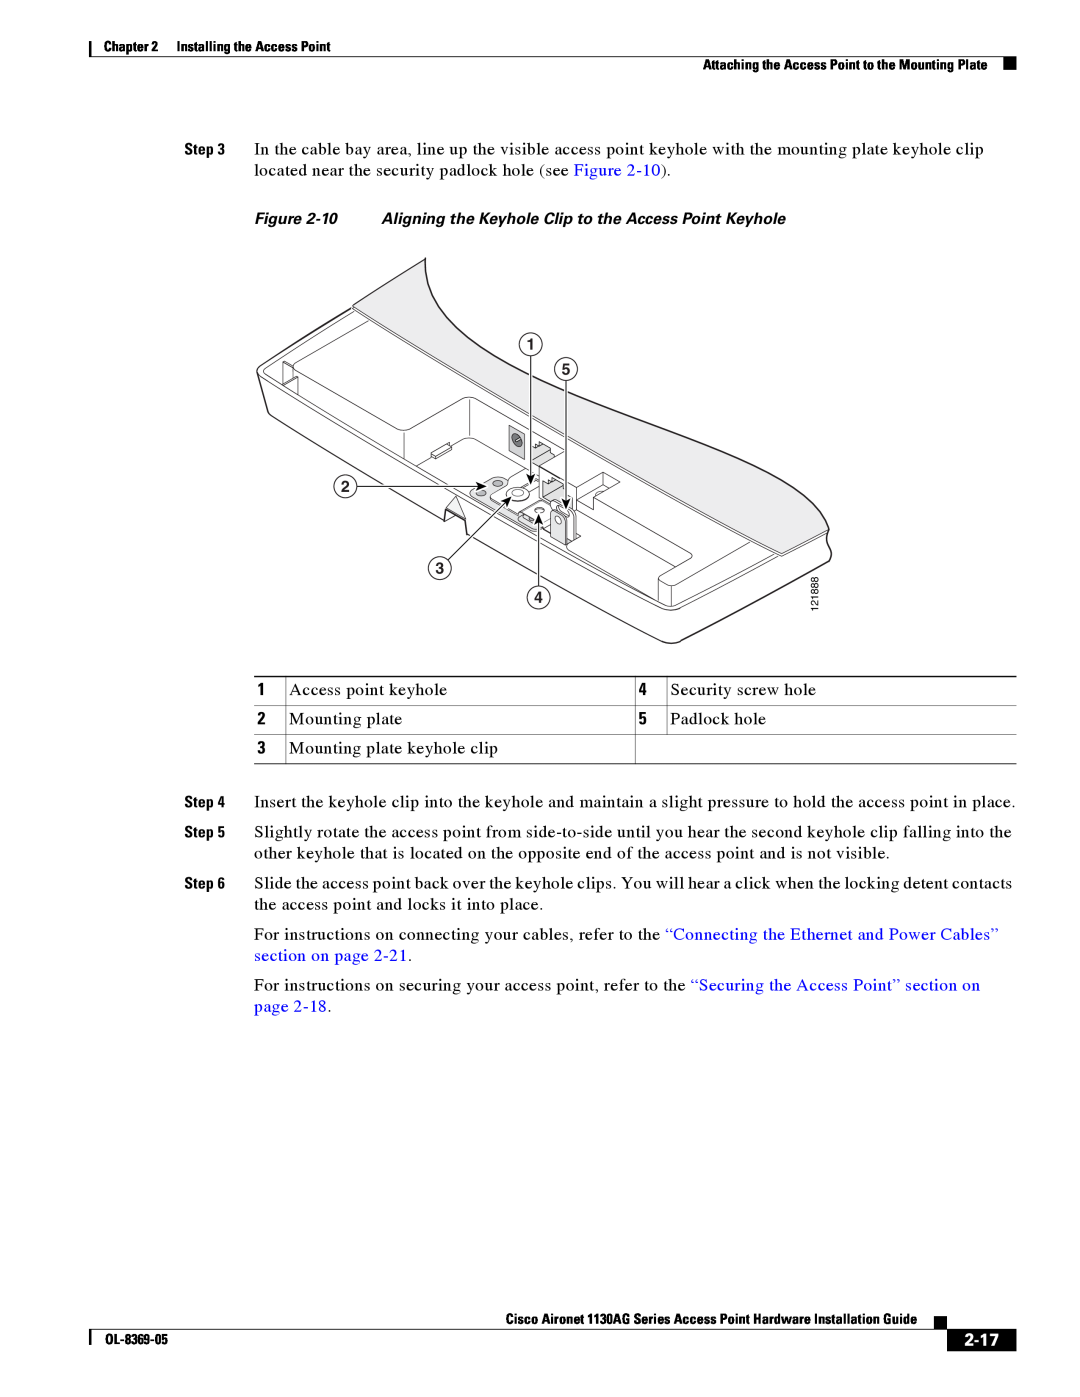 Cisco Systems 1130AG manual 2-17, 10 Aligning the Keyhole Clip to the Access Point Keyhole 